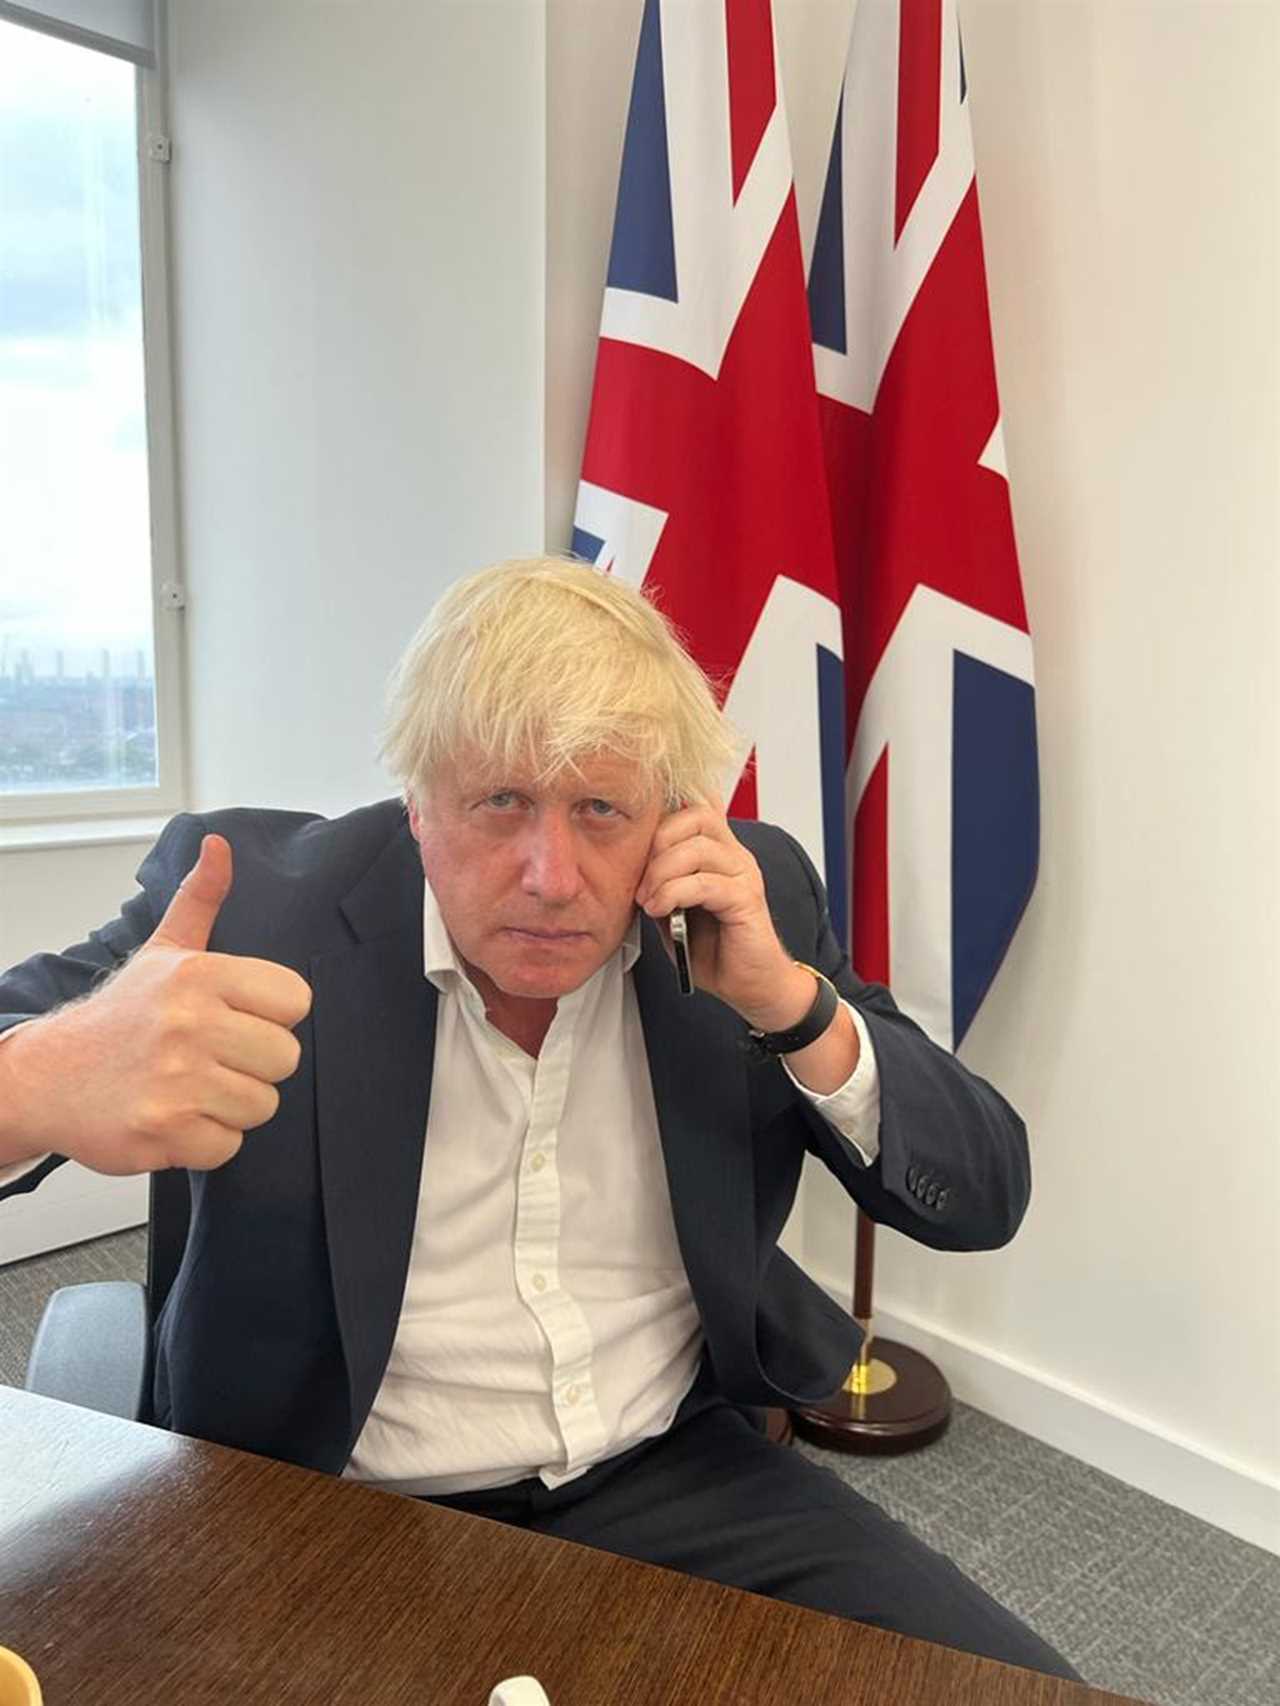 Inside race to be PM as Boris Johnson rallies his supporters just hours after failed summit with Rishi Sunak